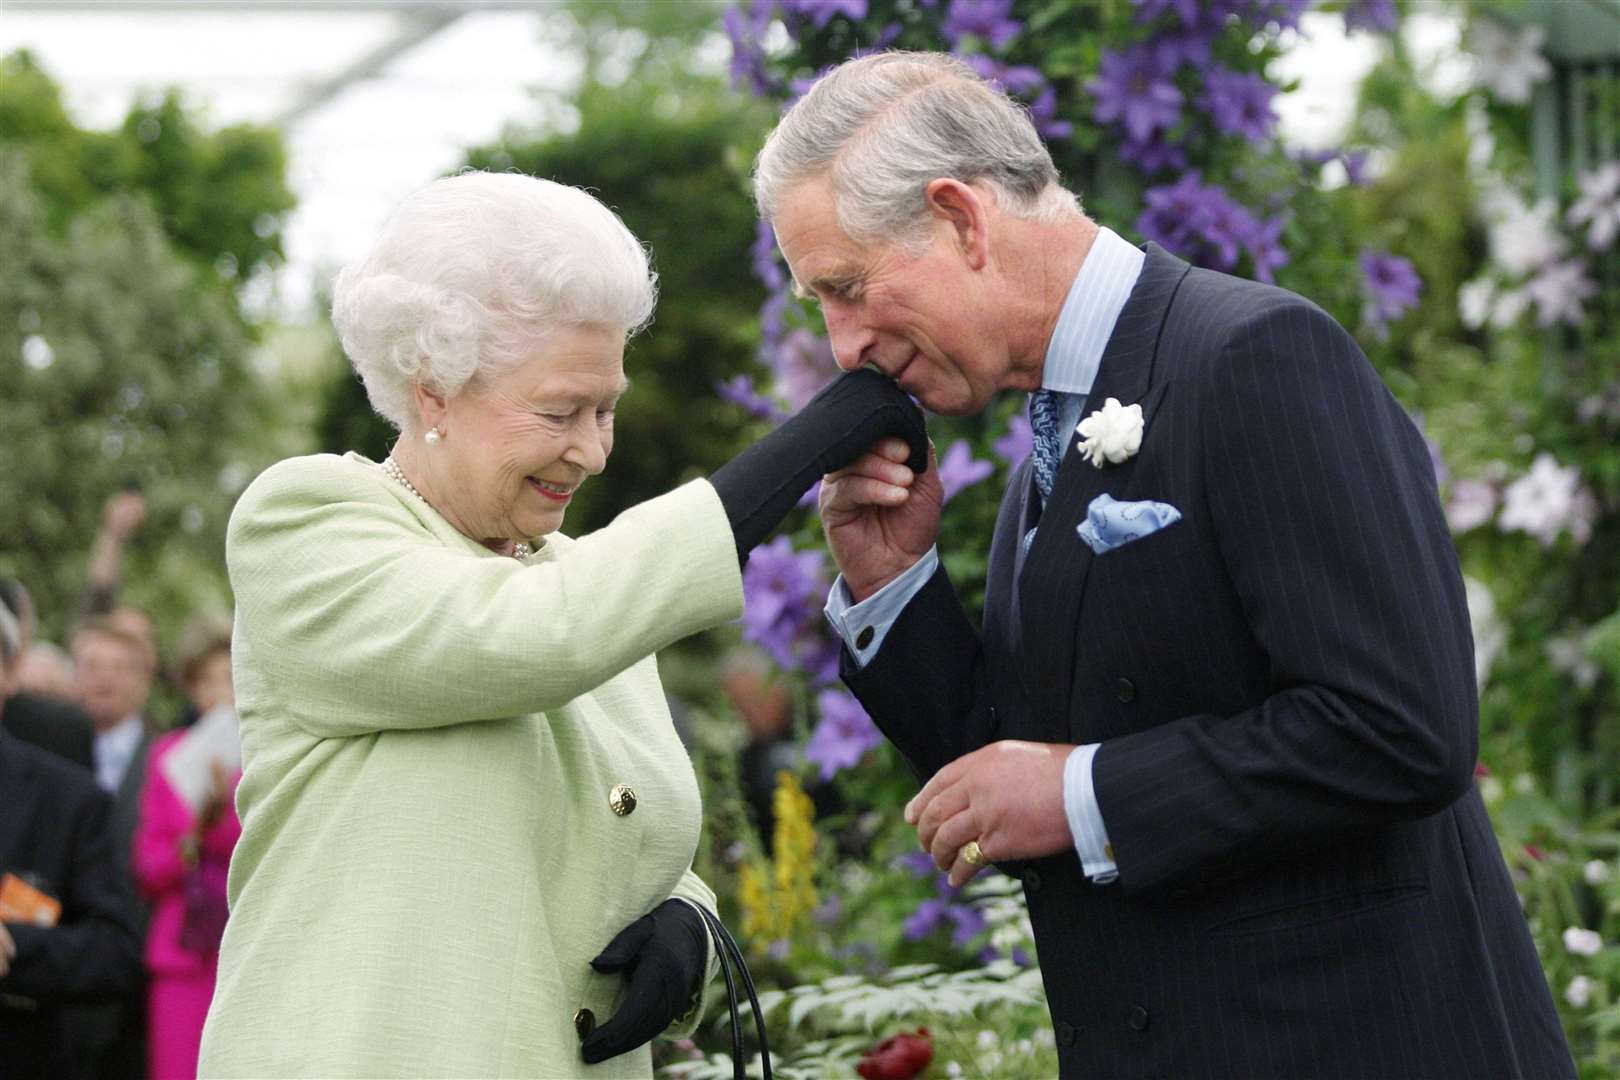 The late Queen presenting her son the then-Prince of Wales with the Royal Horticultural Society’s most prestigious award, the Victoria Medal of Honour at Chelsea in 2008 (Sang Tan/PA)